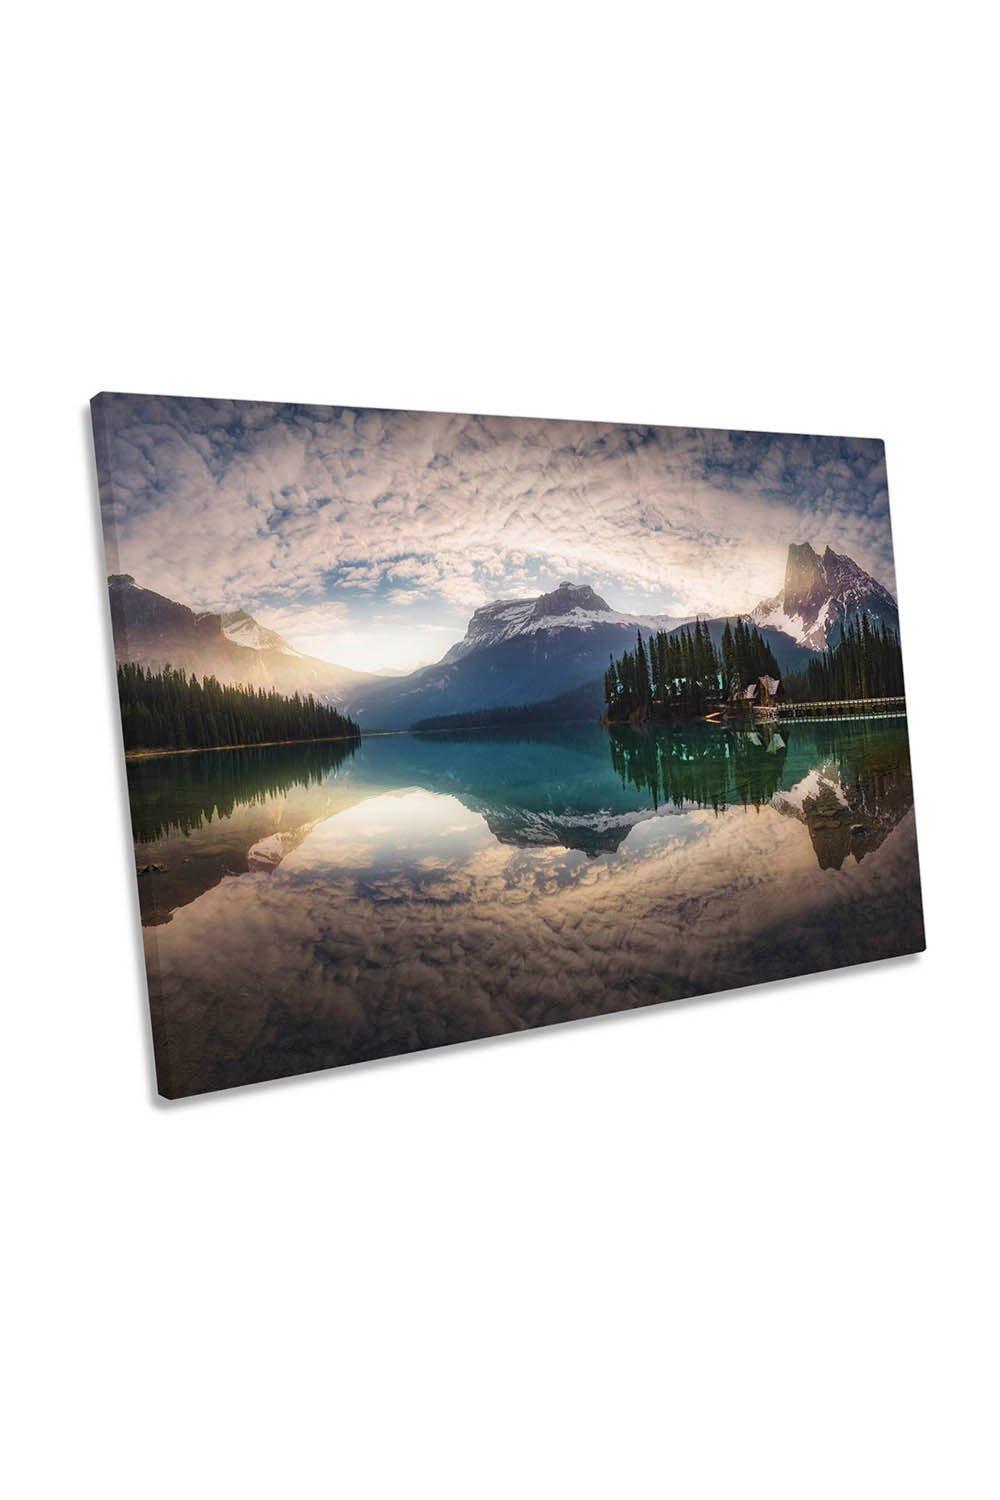 Mirror Emerald Canada Rockies Mountains Canvas Wall Art Picture Print